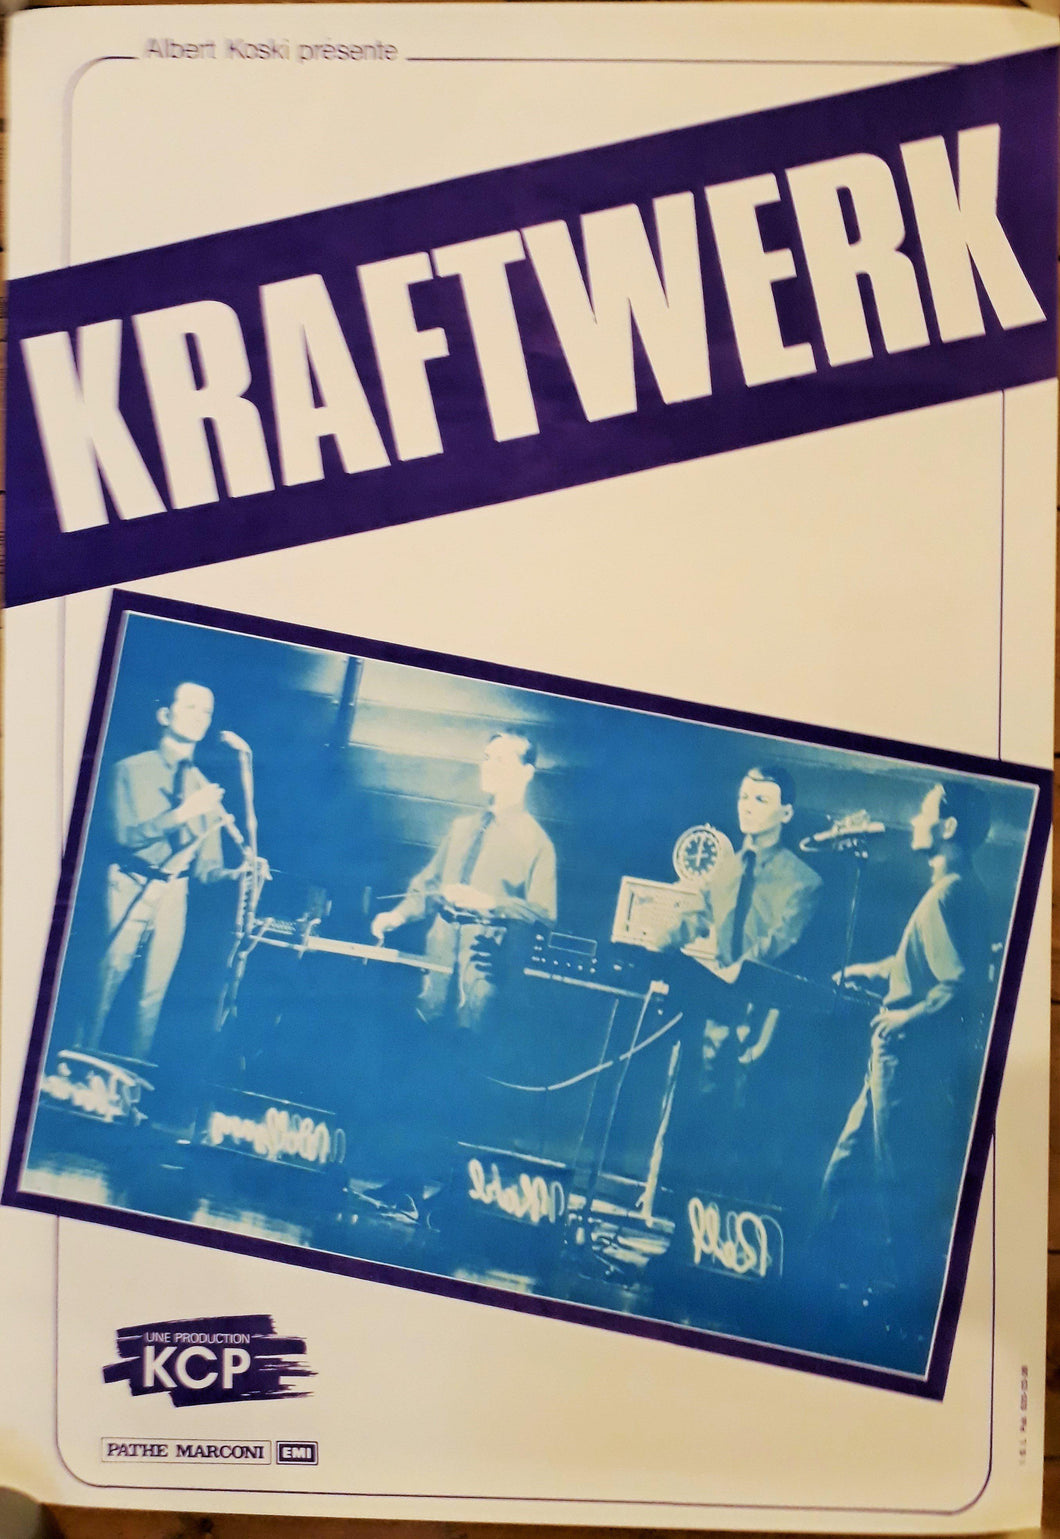 kraftwerk concert promo poster - 1970s designed French repro - Original Music and Movie Posters for sale from Bamalama - Online Poster Store UK London